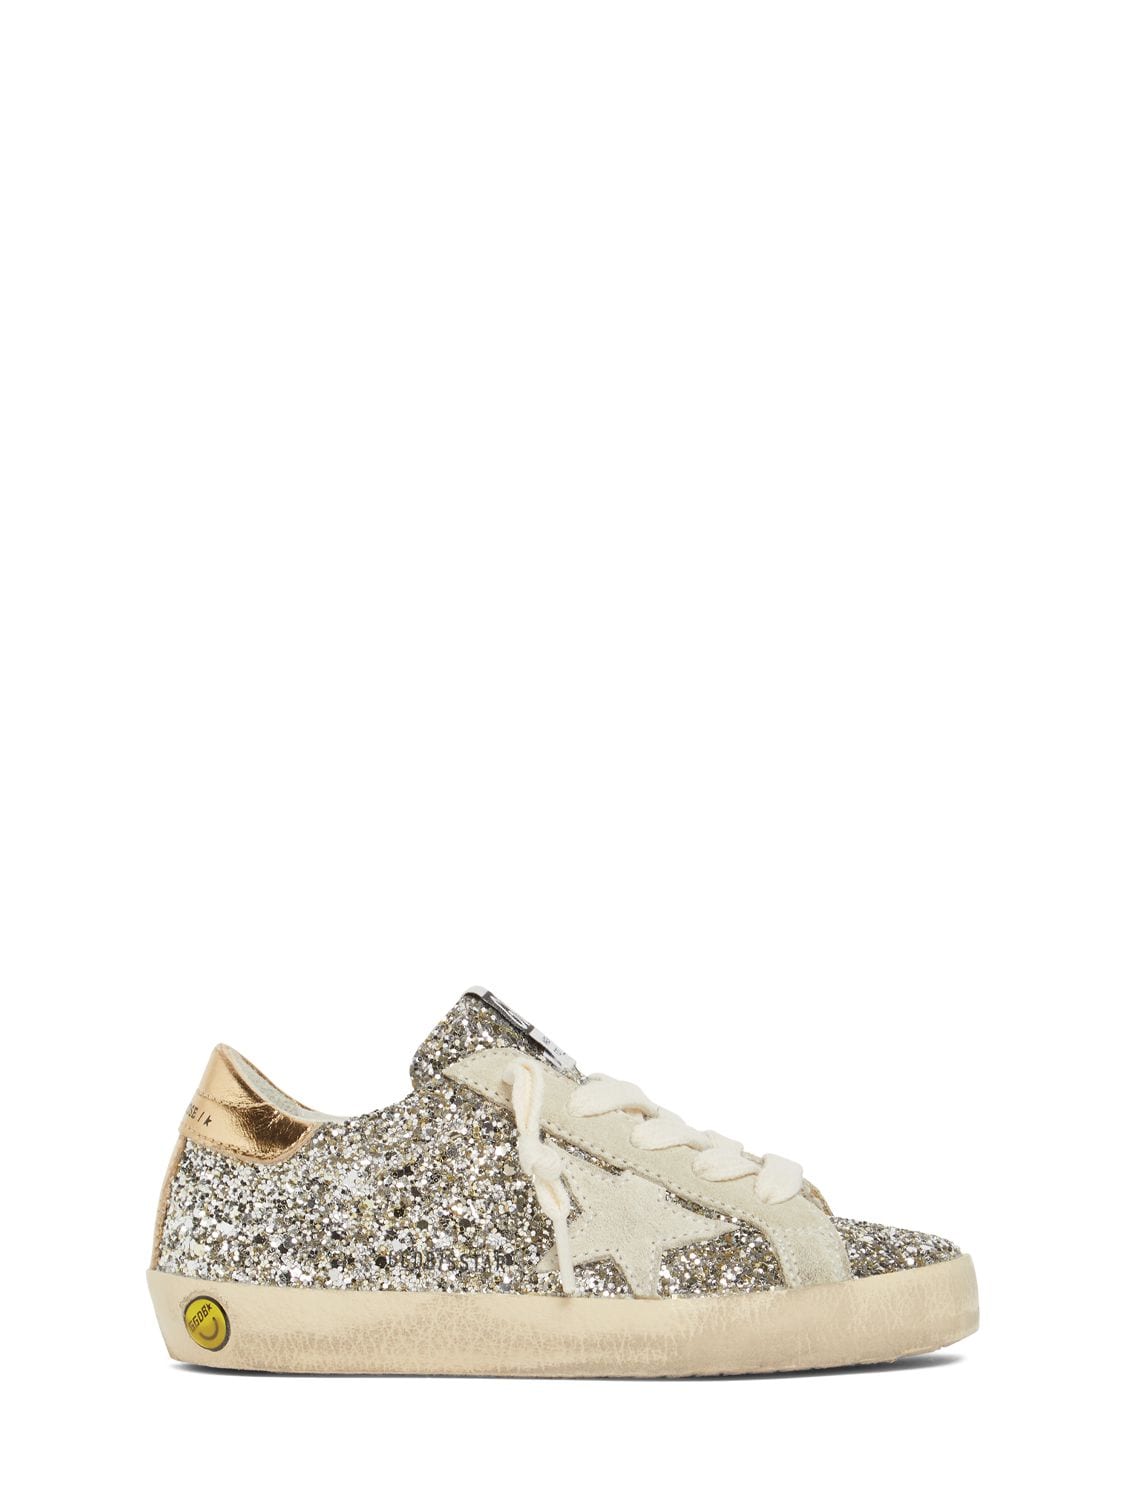 Image of Super-star Glittered Lace-up Sneakers